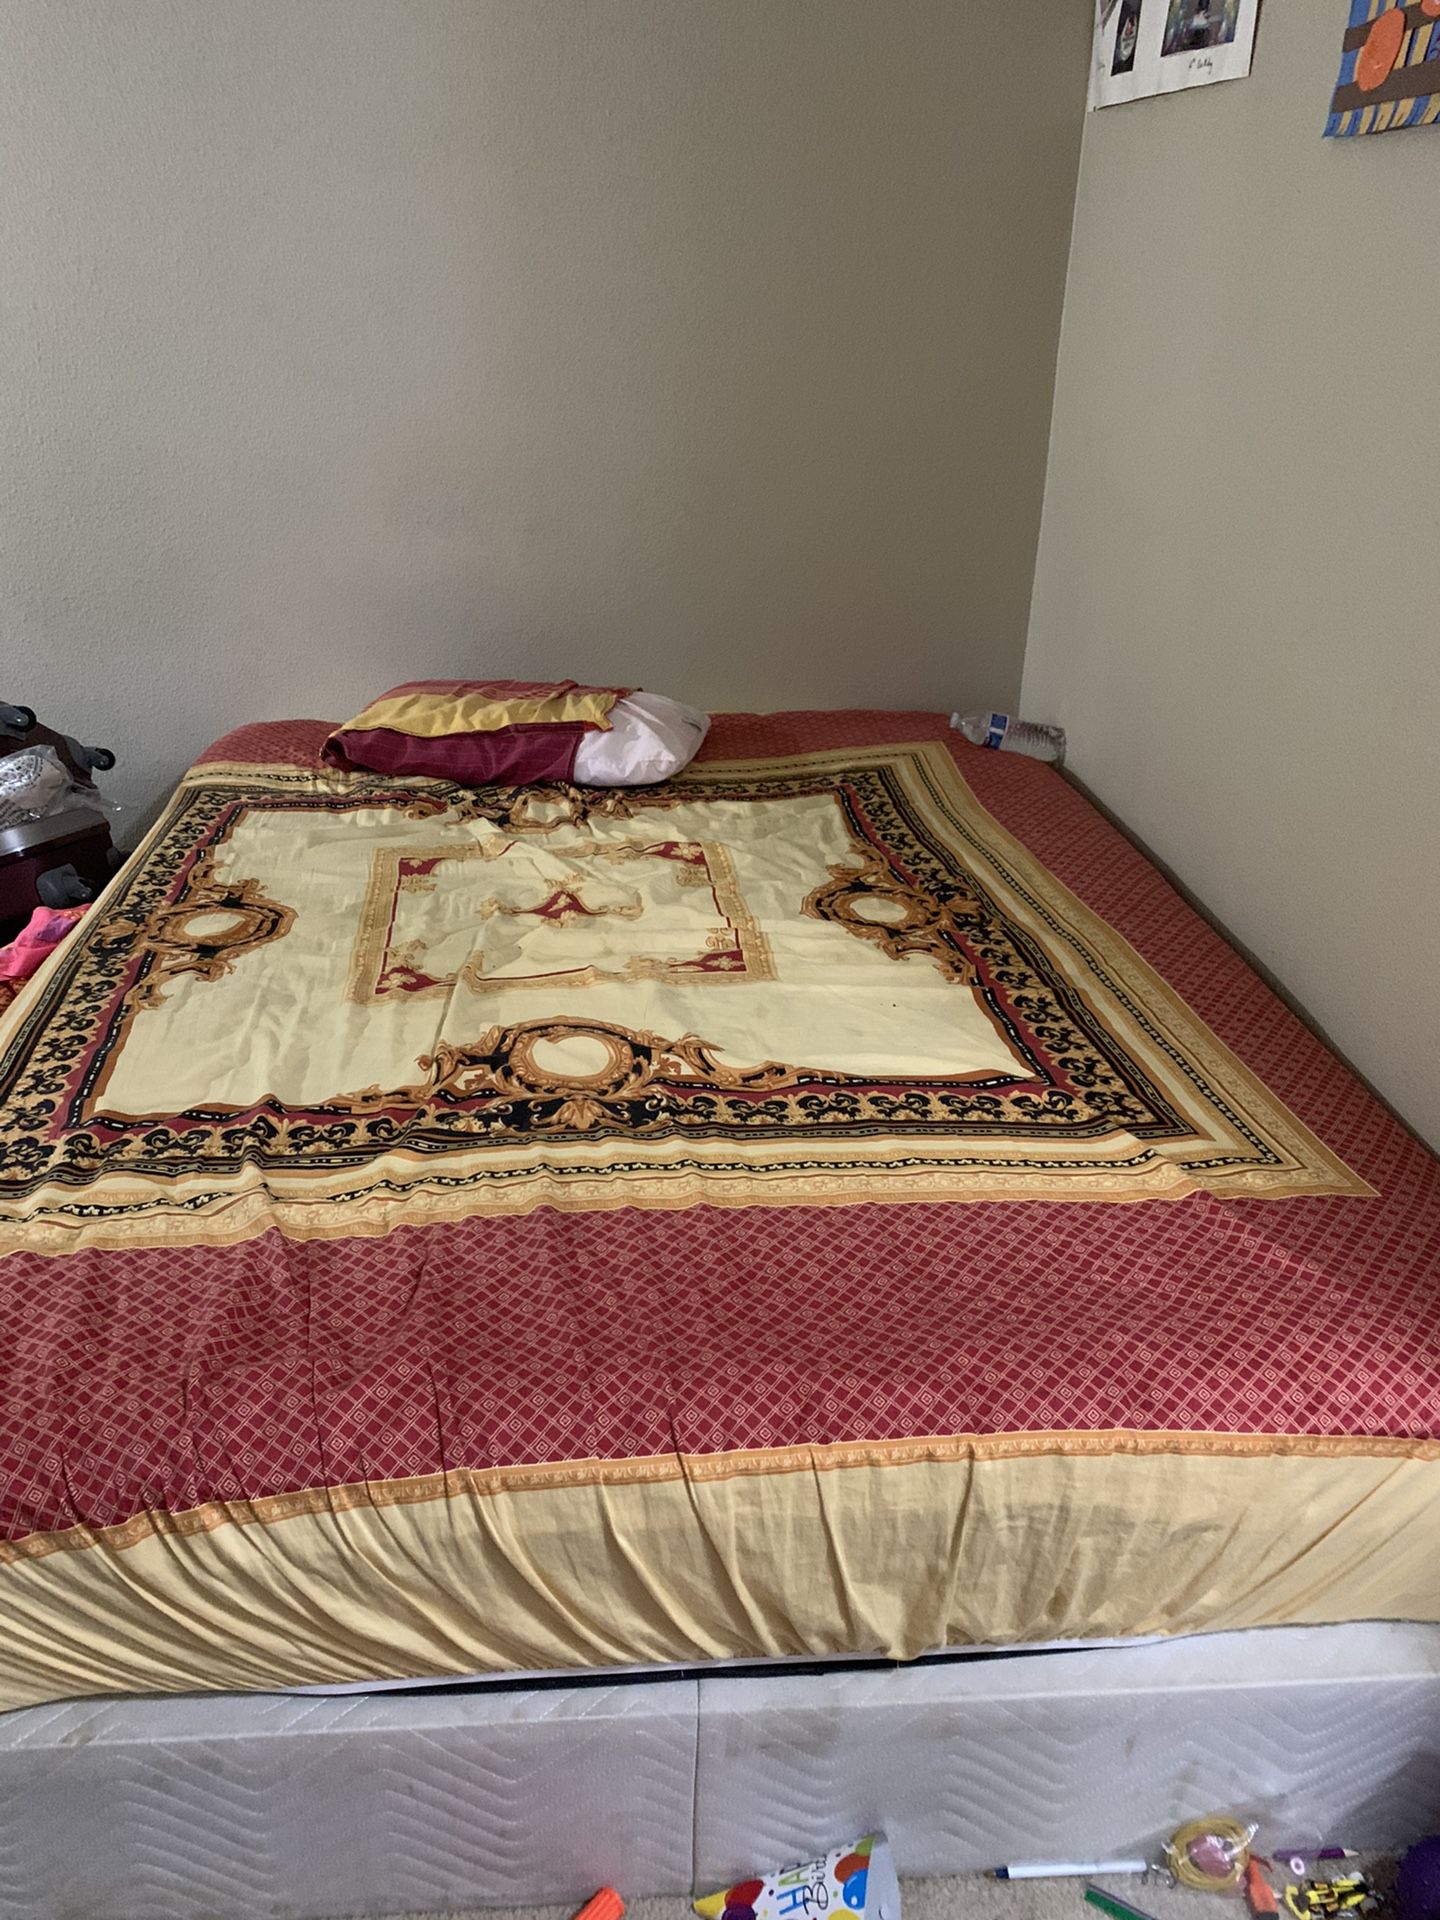 Queen mattress. In a good condition. It comes with bed sheet pillow and blanket